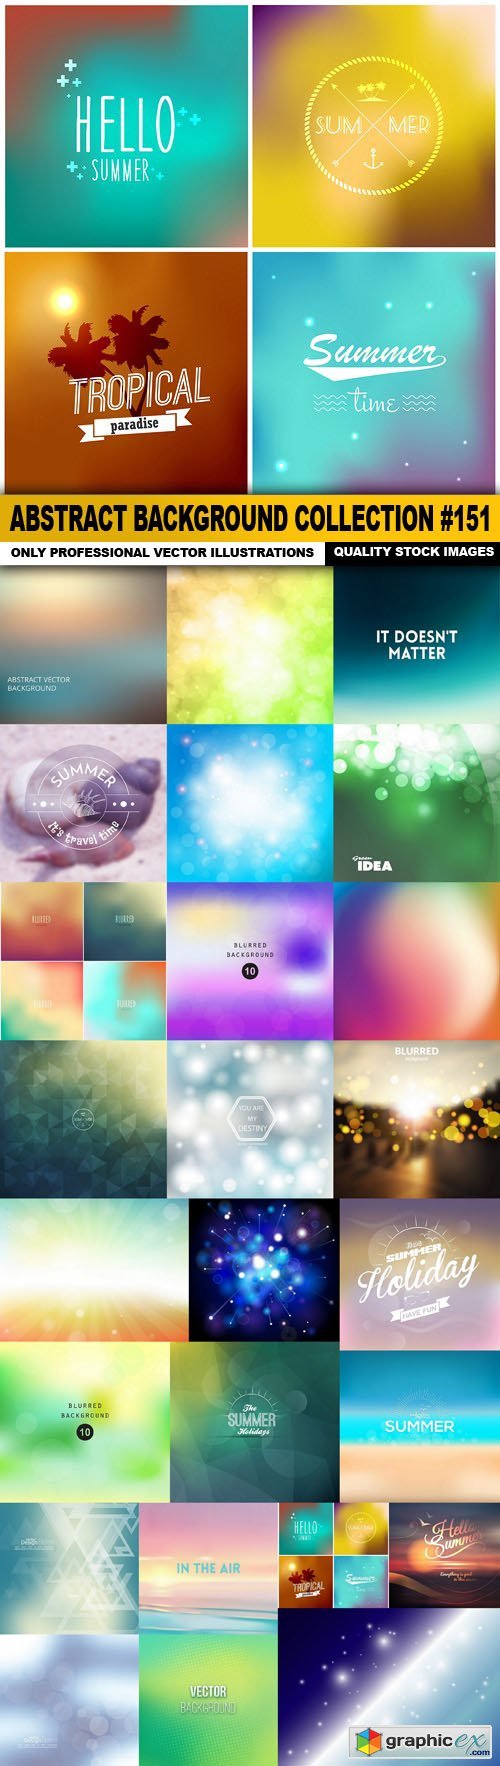 Abstract Background Collection #151